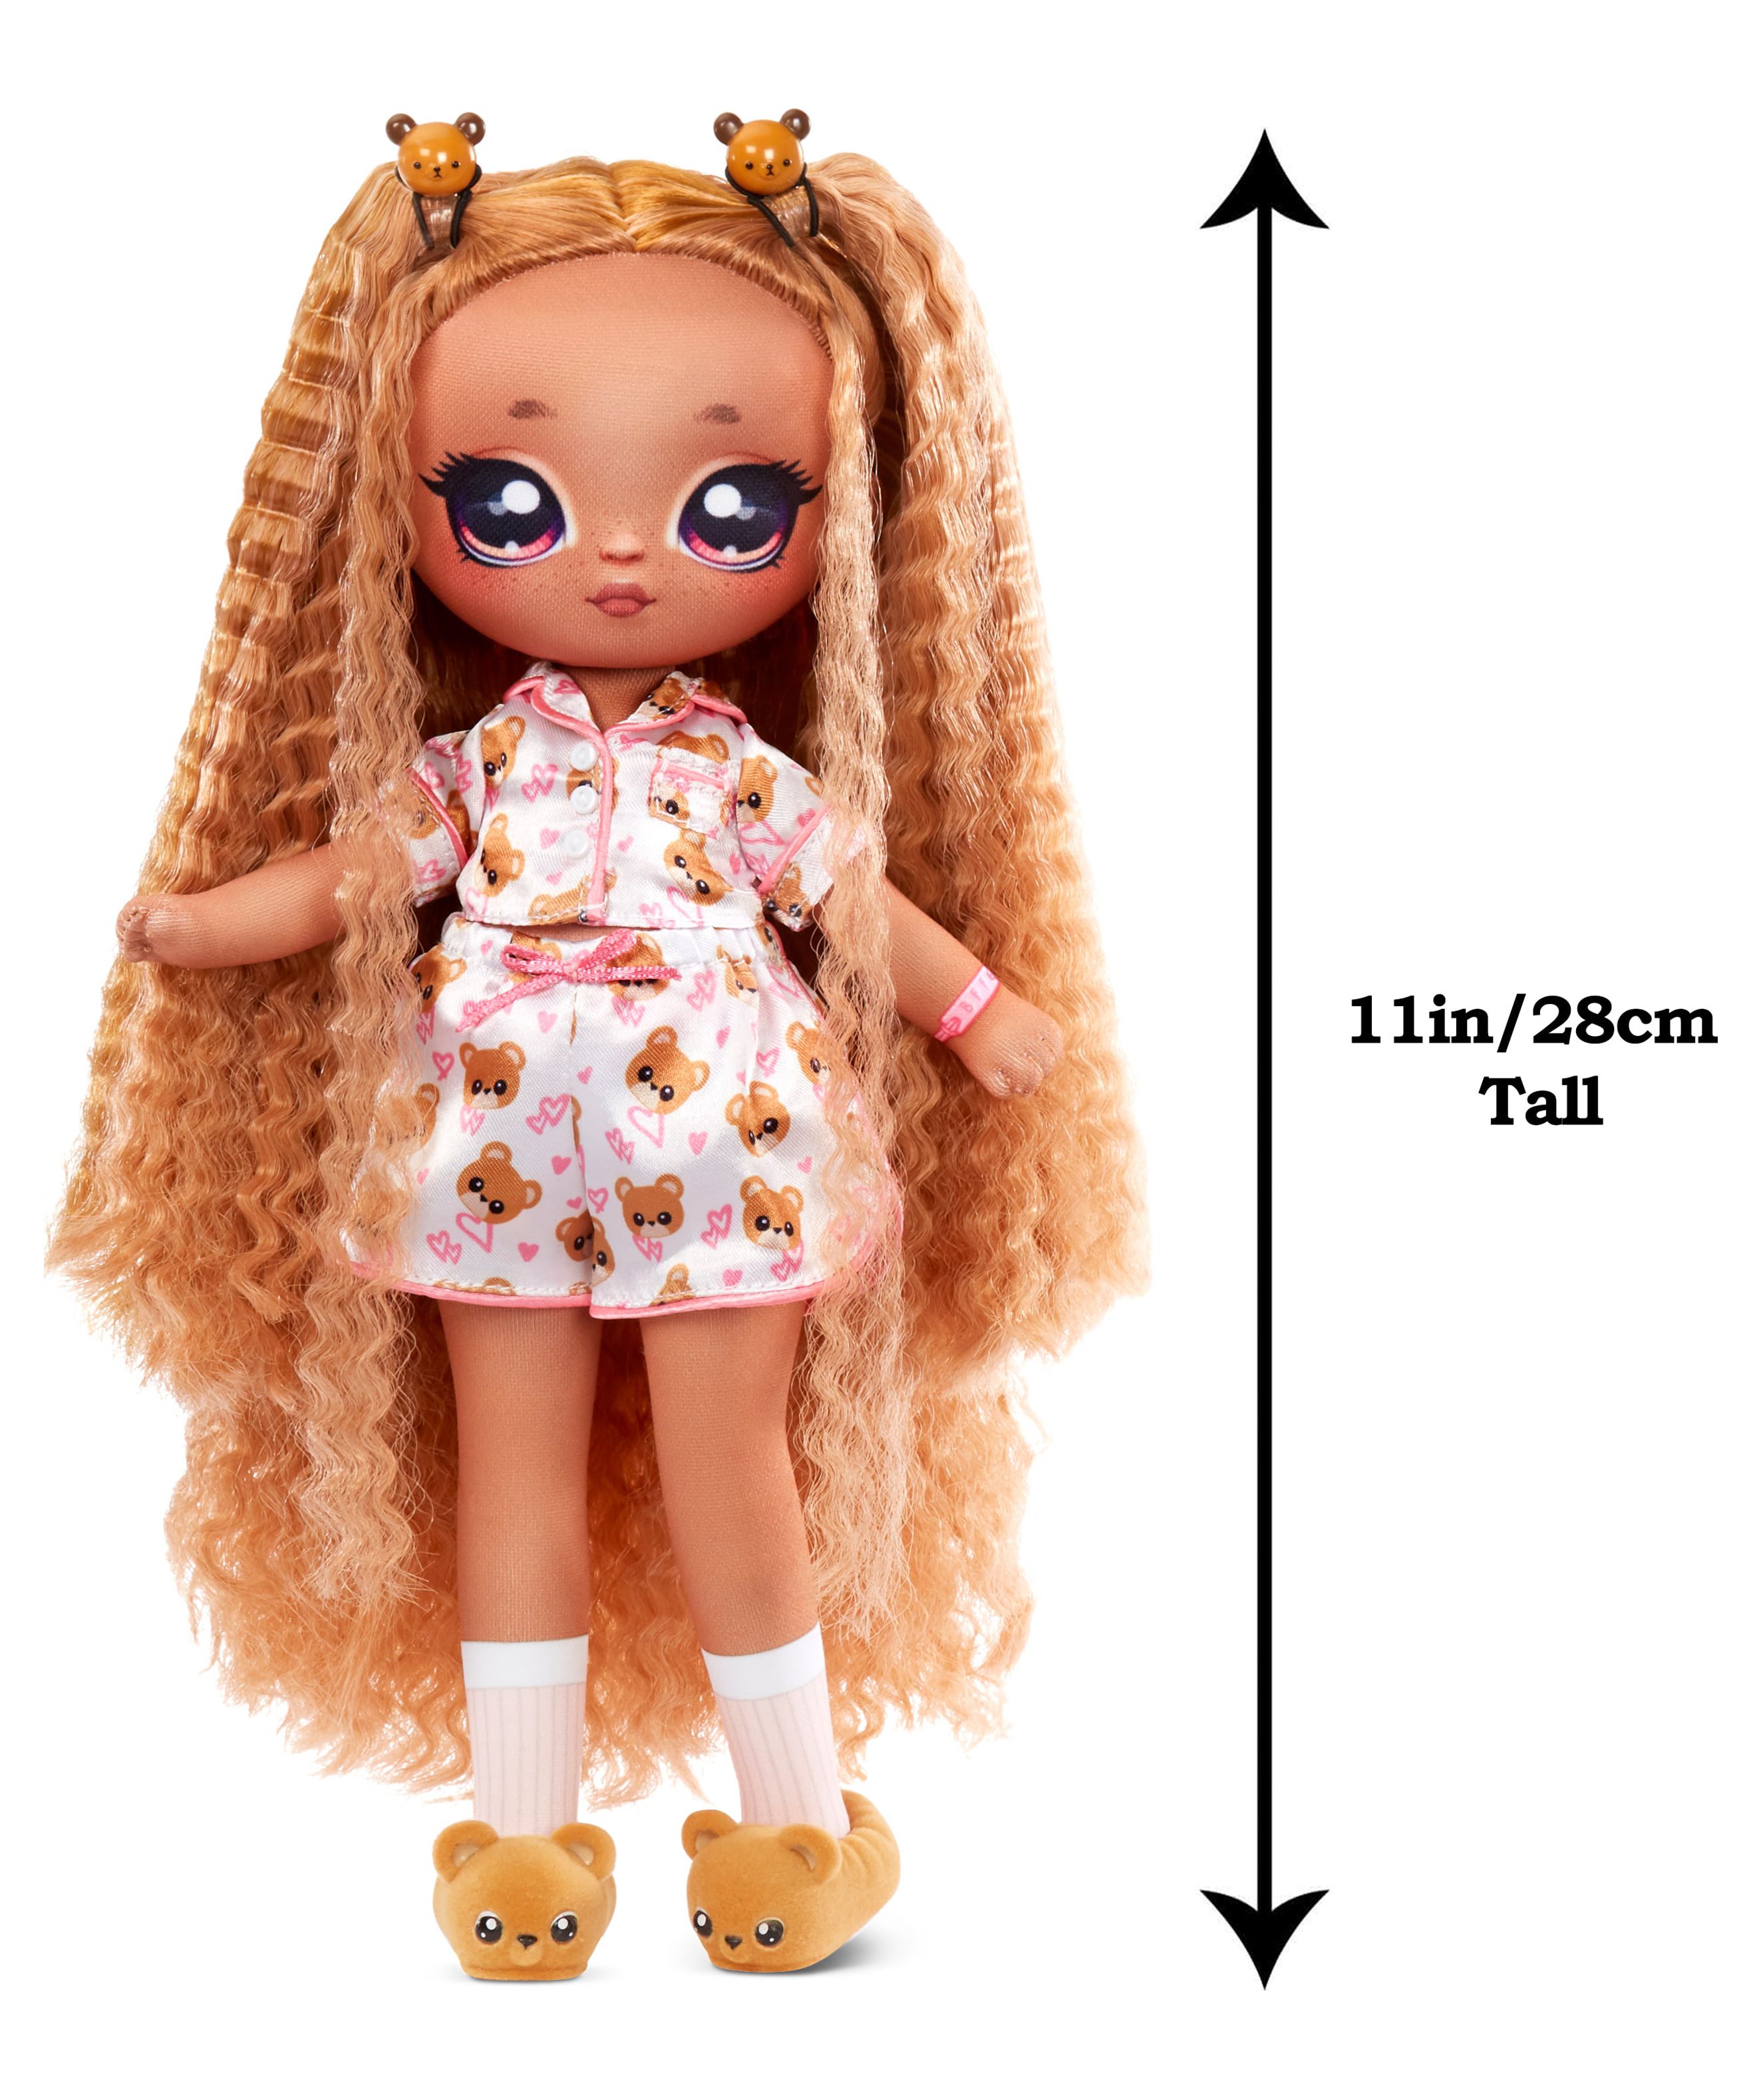 Na Na Na Surprise Teens™ Slumber Party Fashion Doll – Lara Vonn, 11 inch Soft Fabric Doll, Teddy Bear Inspired with Brunette Hair - image 4 of 7